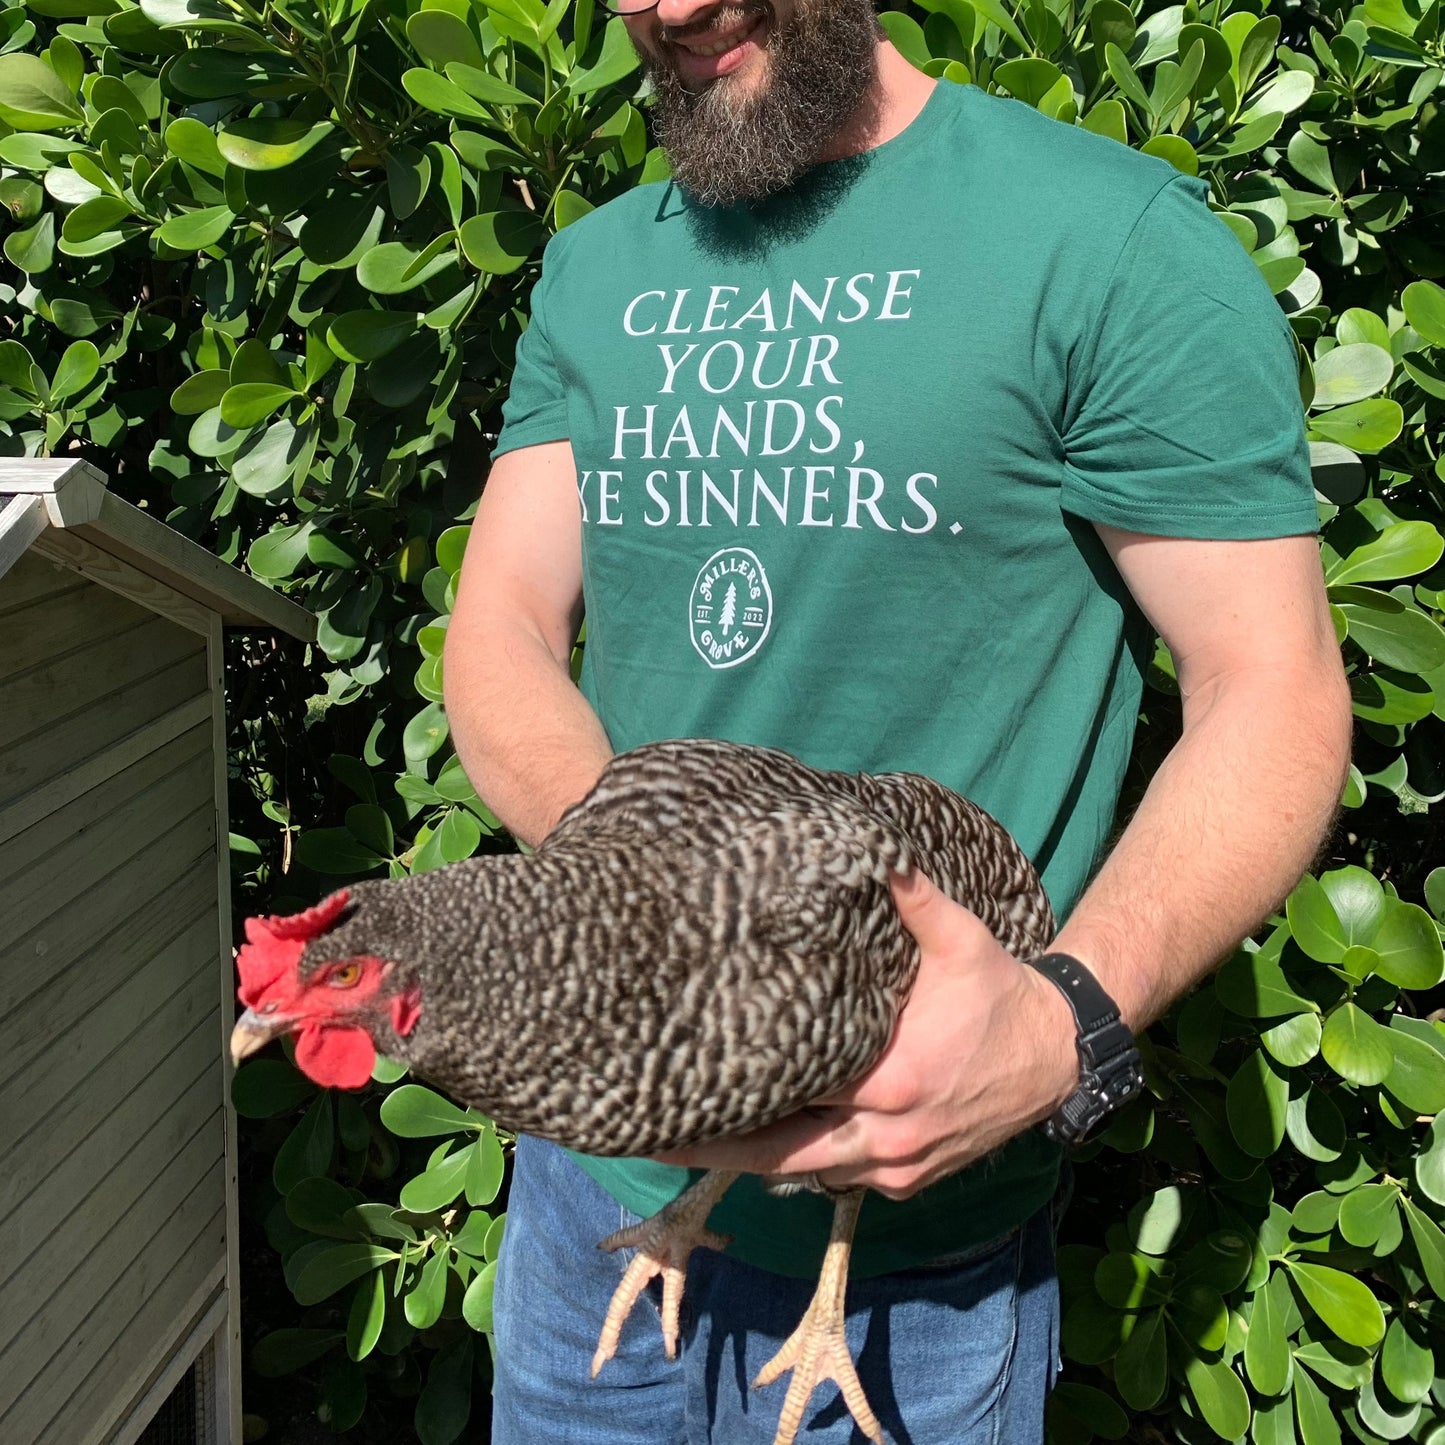 Green short sleeve t shirt that says "cleanse your hands, ye sinners".  Man wearing the shirt is holding a chicken.  